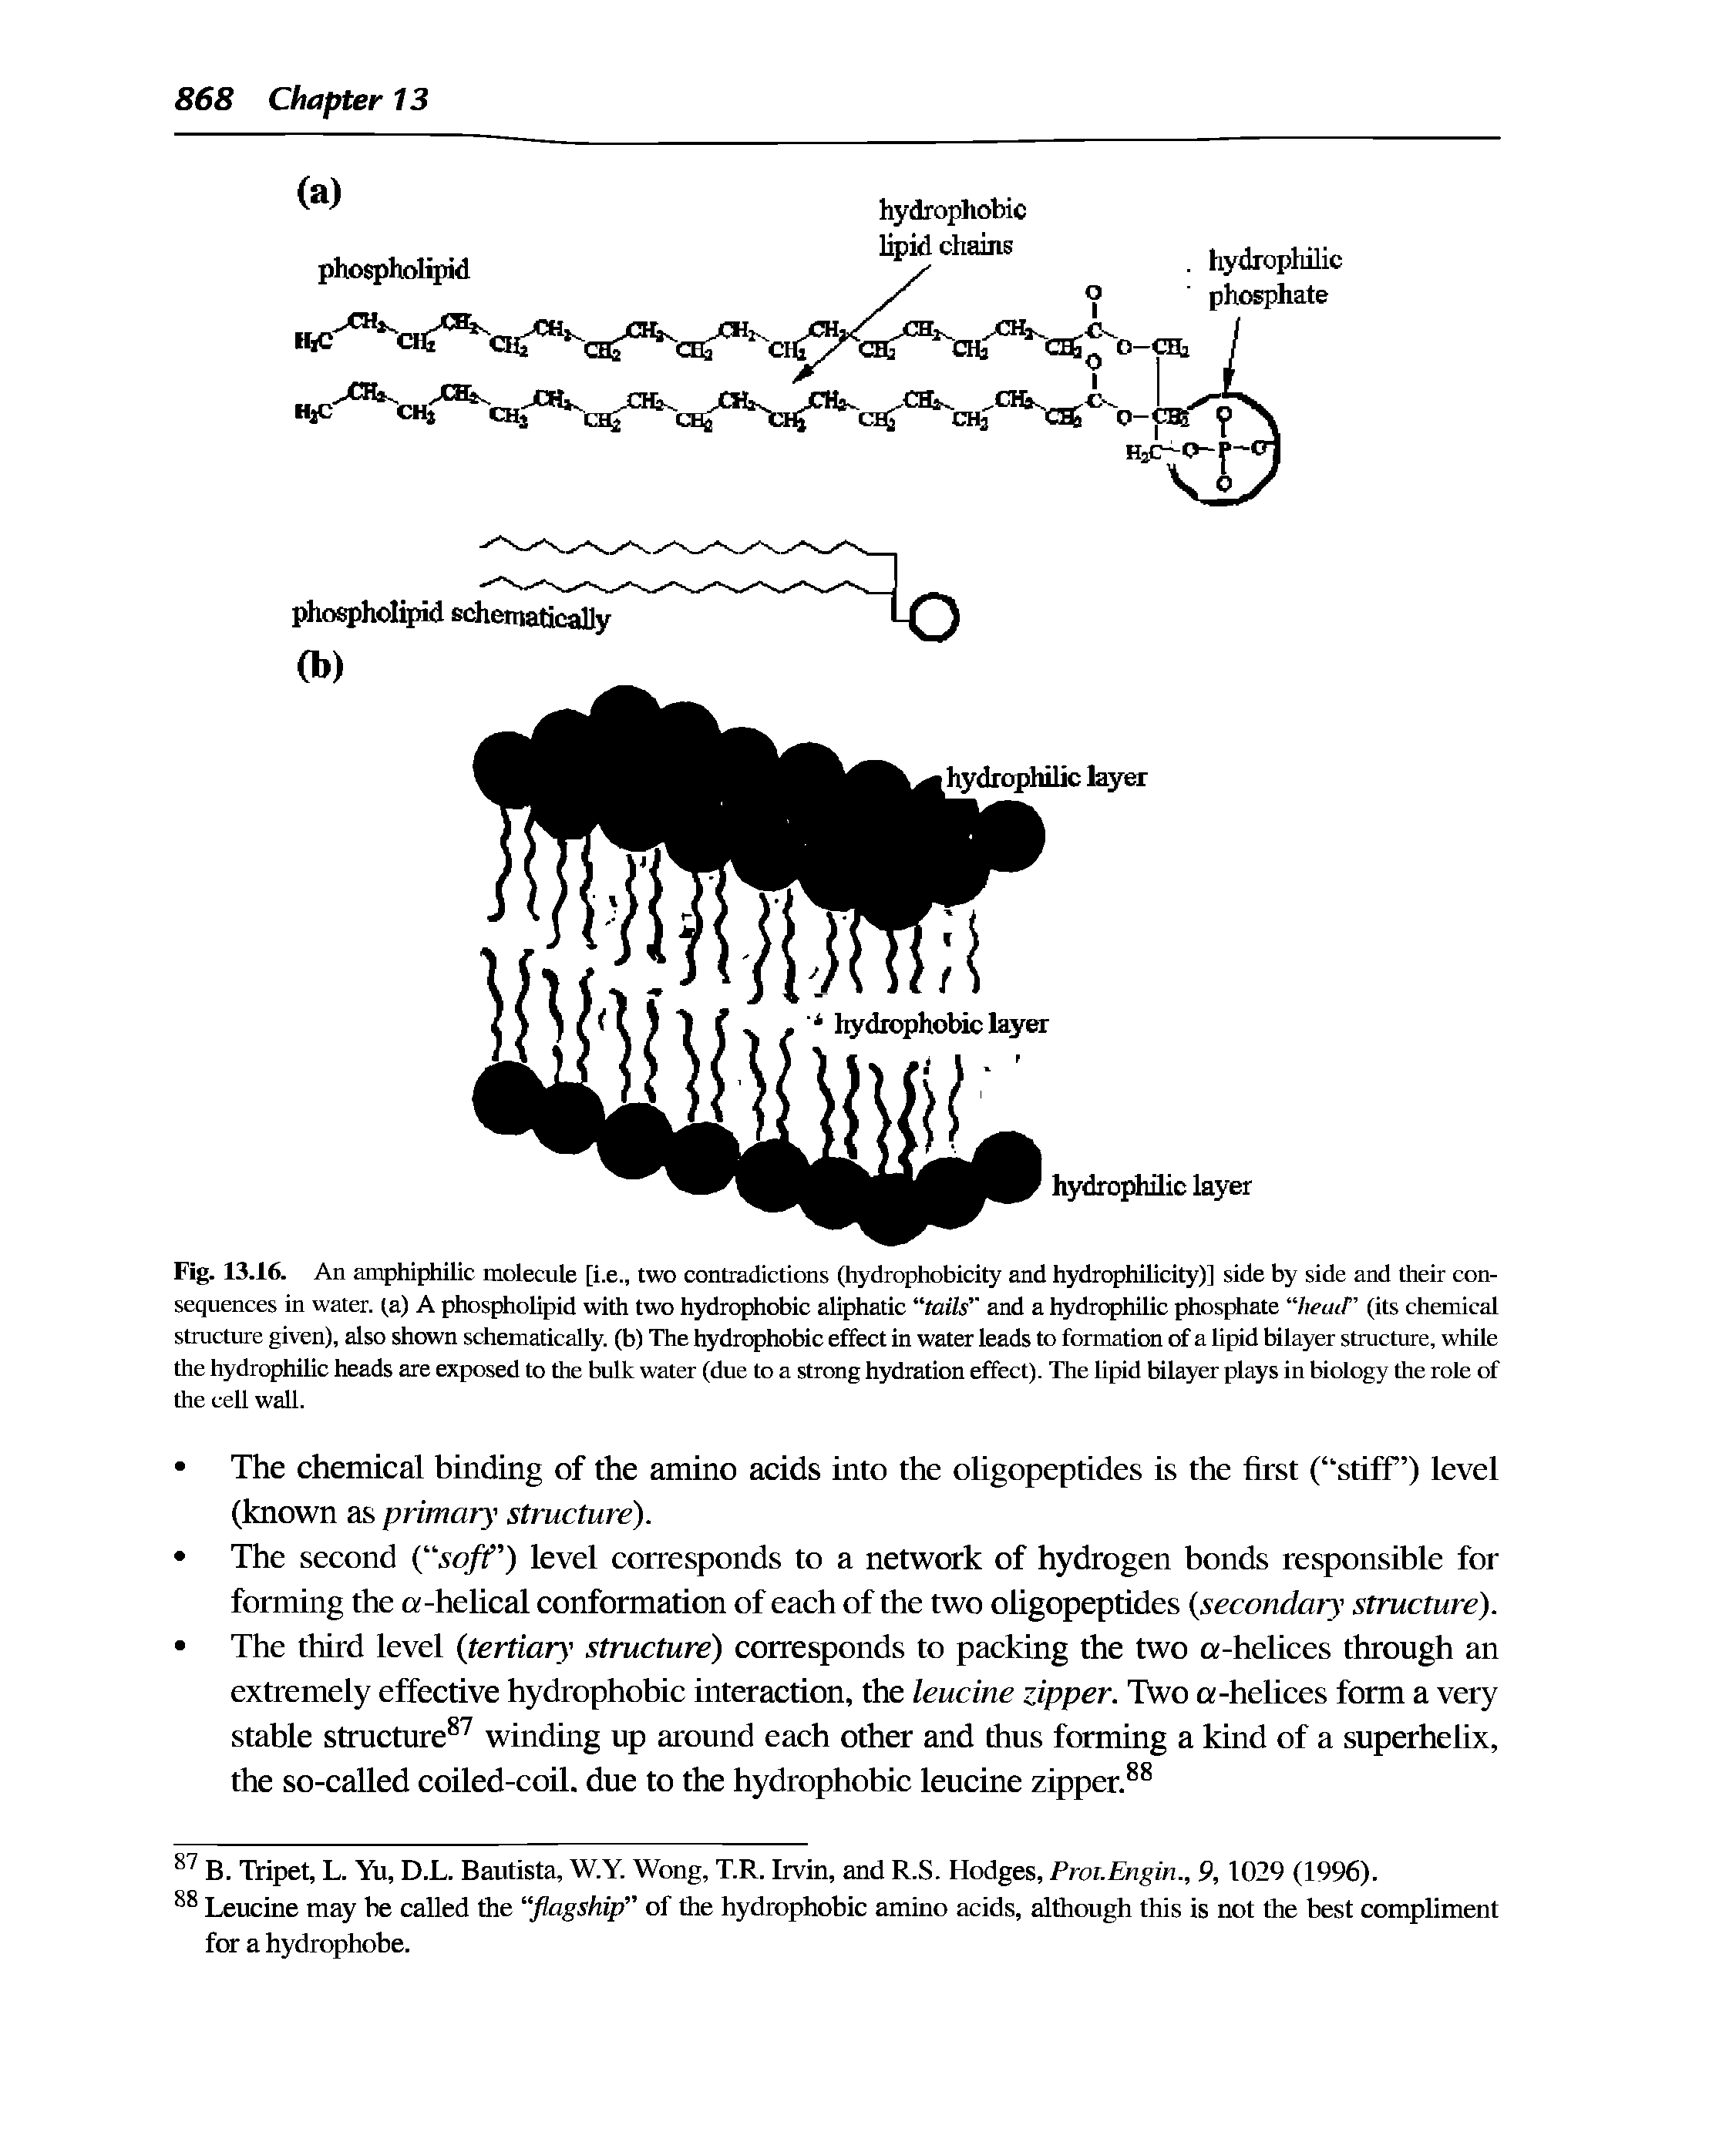 Fig. 13.16. An amphiphilic molecule [i.e., two contradictions (hydrophobicity and hydrophilicity)] side by side and their consequences in water, la) A phospholipid with two hydrophobic aliphatic tails" and a hydrophilic phosphate lieatl" (its chemical structure given), also shown schematically, (b) The hydrophobic effect in water leads to formation of a lipid bilayer structure, while the hydrophilic heads are exposed to the bulk water (due to a strong hydration effect). The lipid bilayer plays in biology the role of the cell wall.